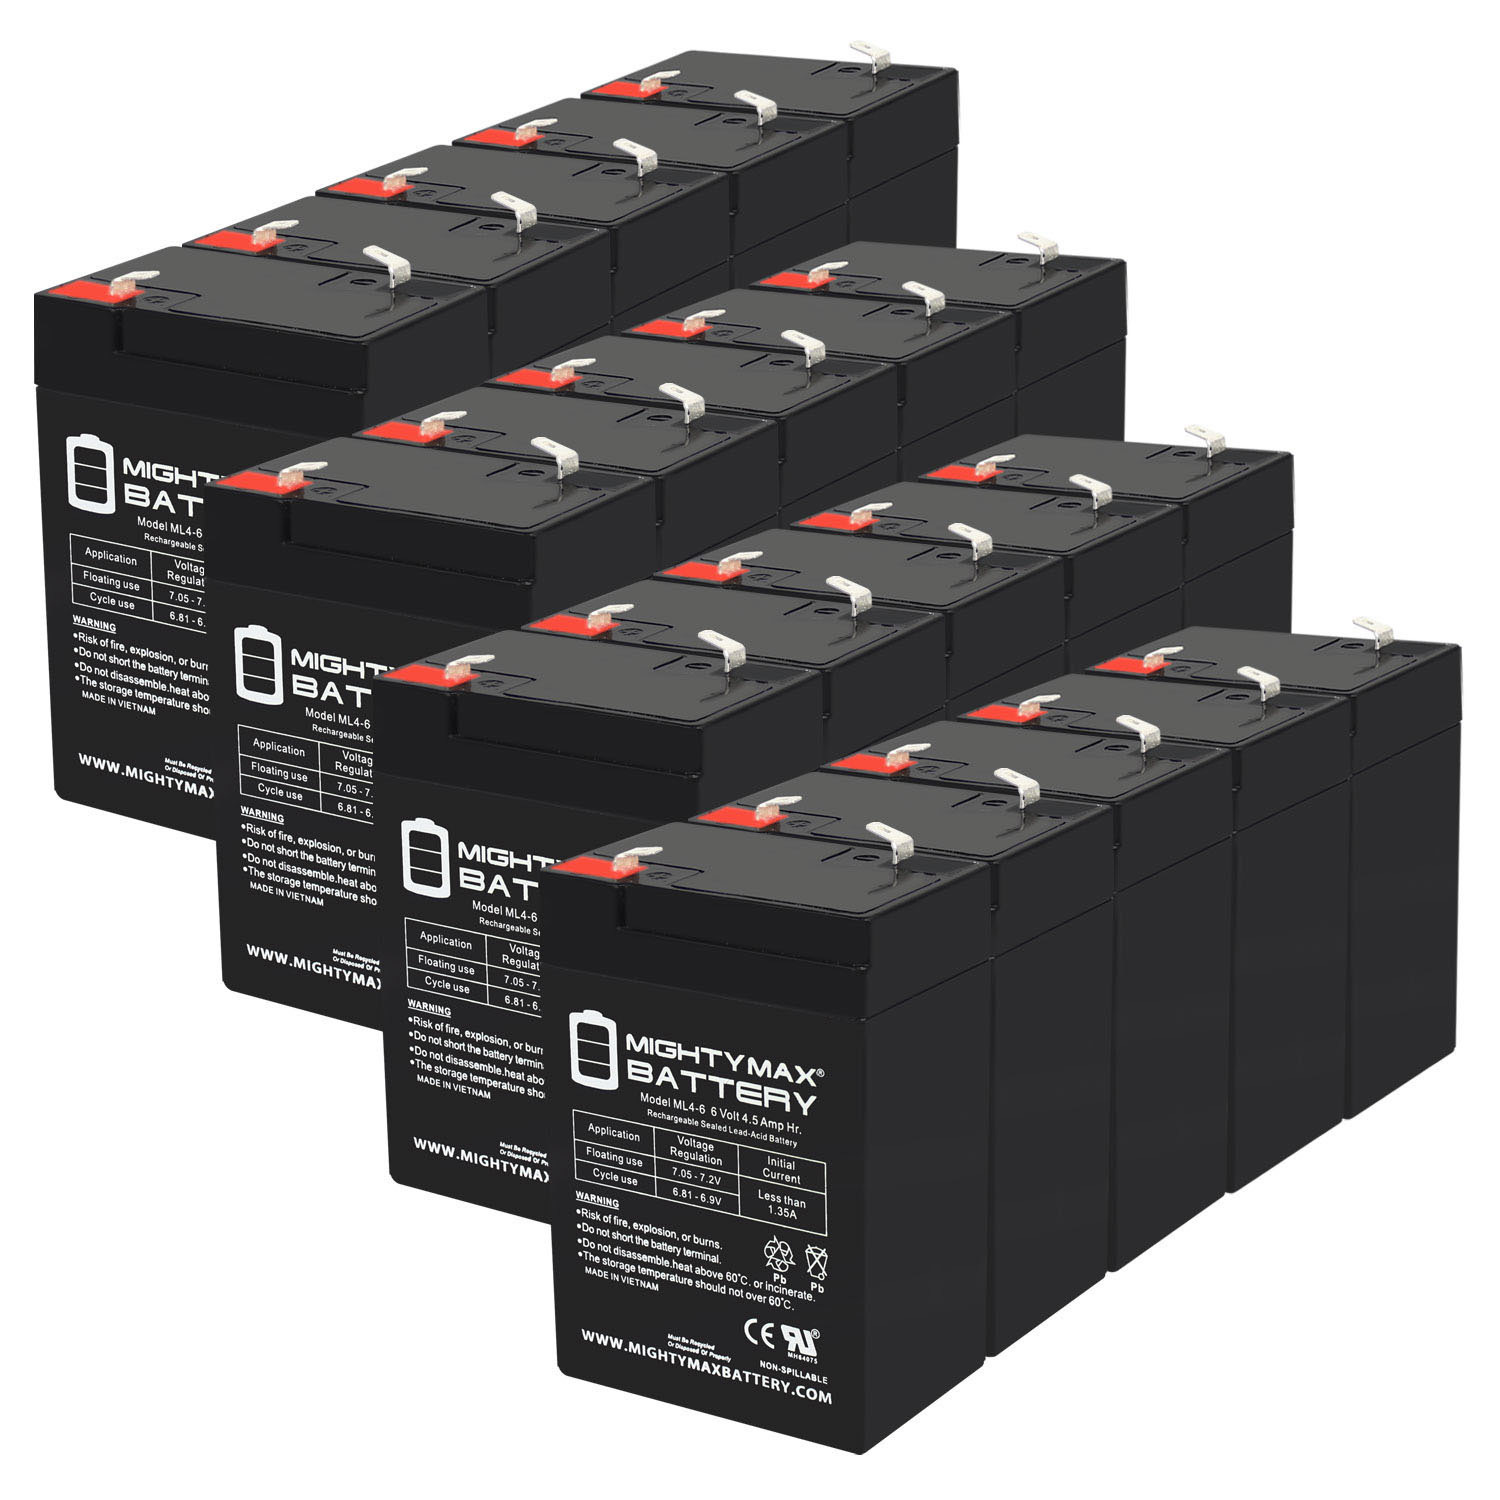 6V 4.5AH SLA Replacement Battery for Dual-Lite LTURB - 20 Pack